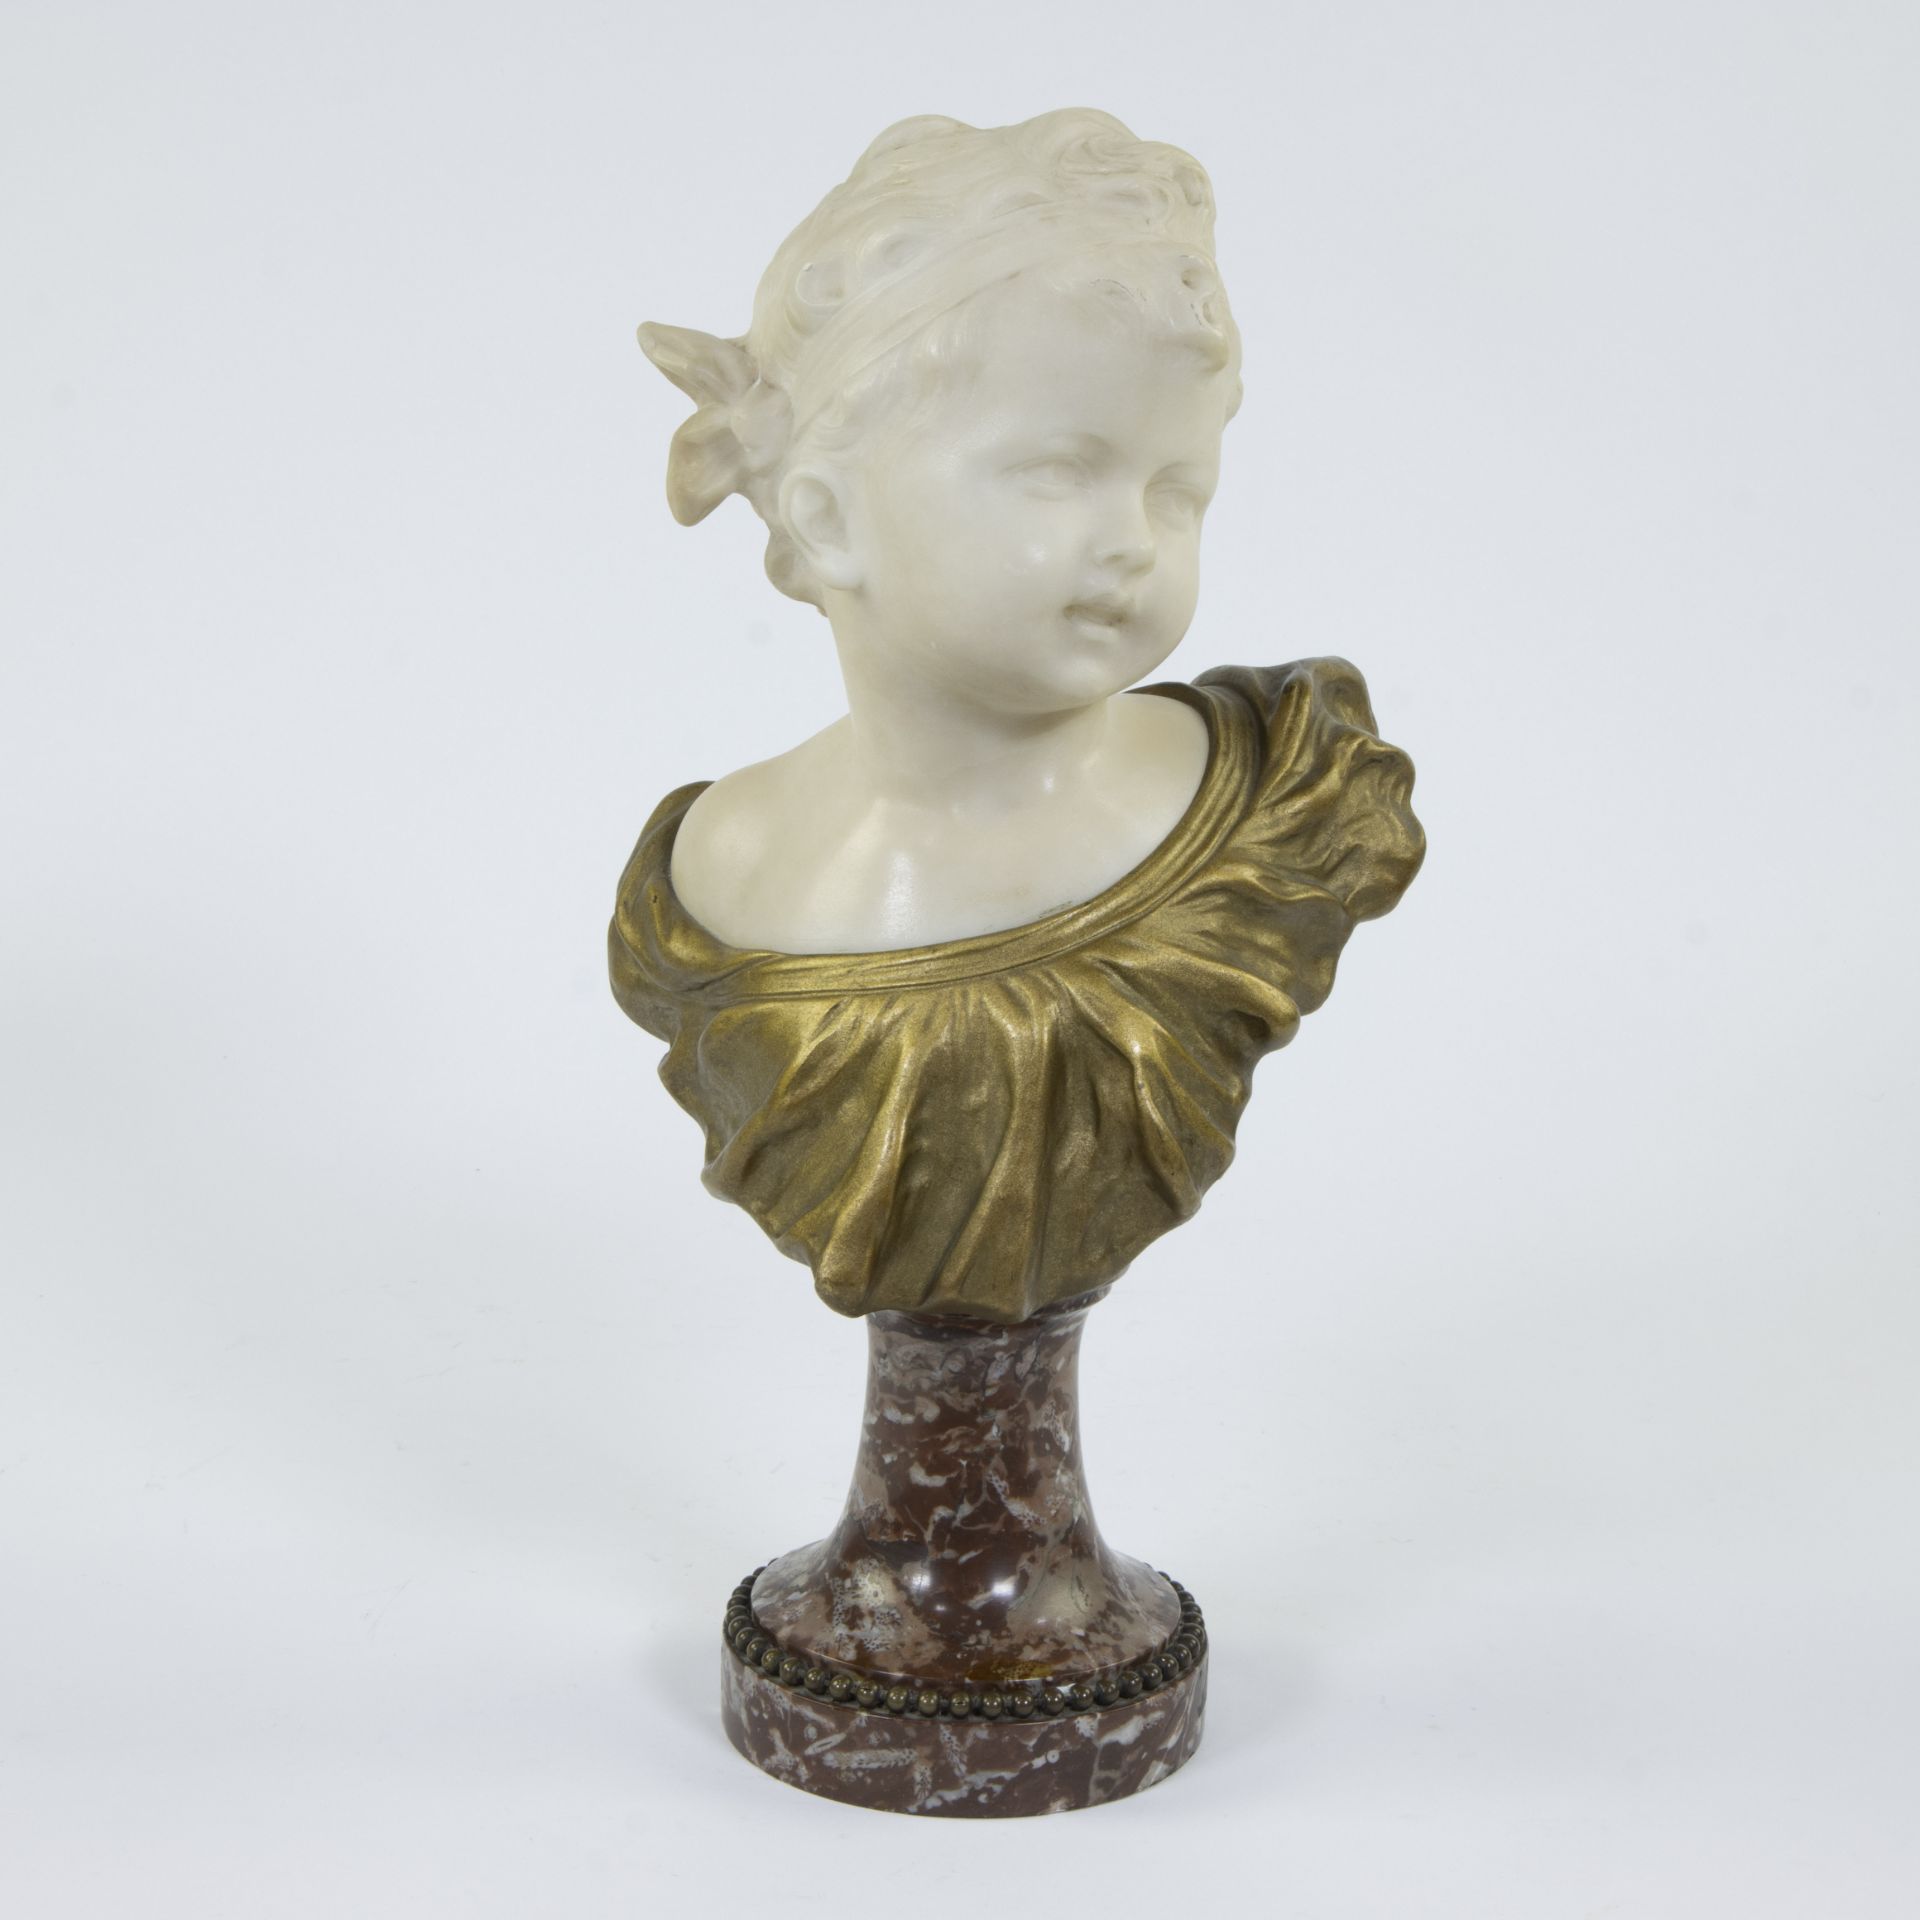 Gustave VAN VAERENBERGH (1873-1927), bust of a child in marble and gilt bronze, signed